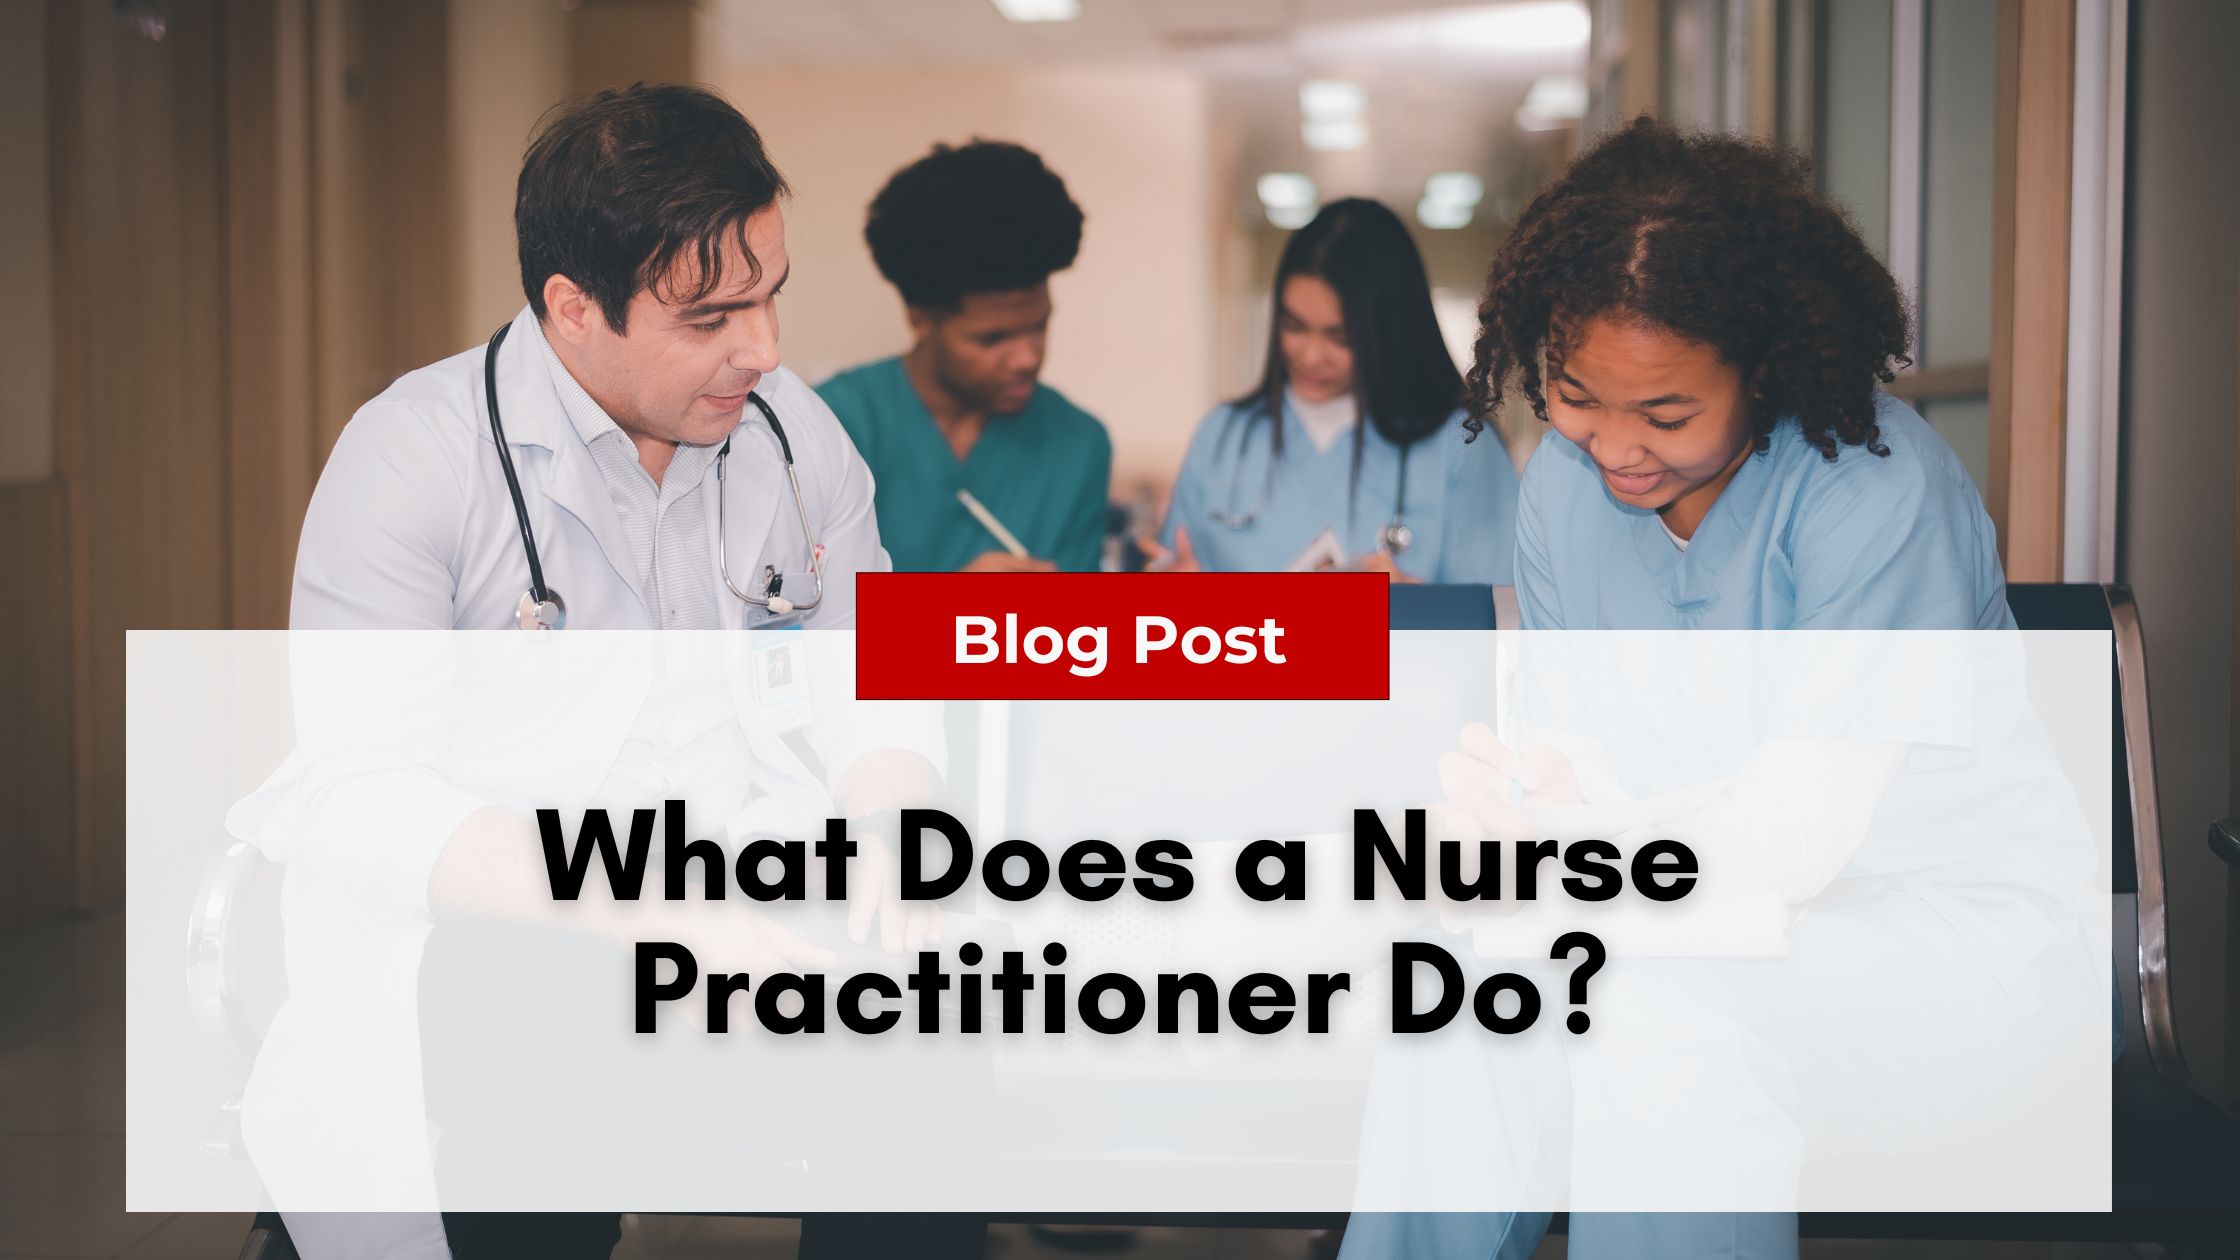 A doctor and three nurse practitioners in scrubs engage in a discussion in a hospital hallway. The image includes a "Blog Post" banner with the text "What Does a Nurse Practitioner Do?" addressing the crucial topic of Nurse Practitioner Burnout.